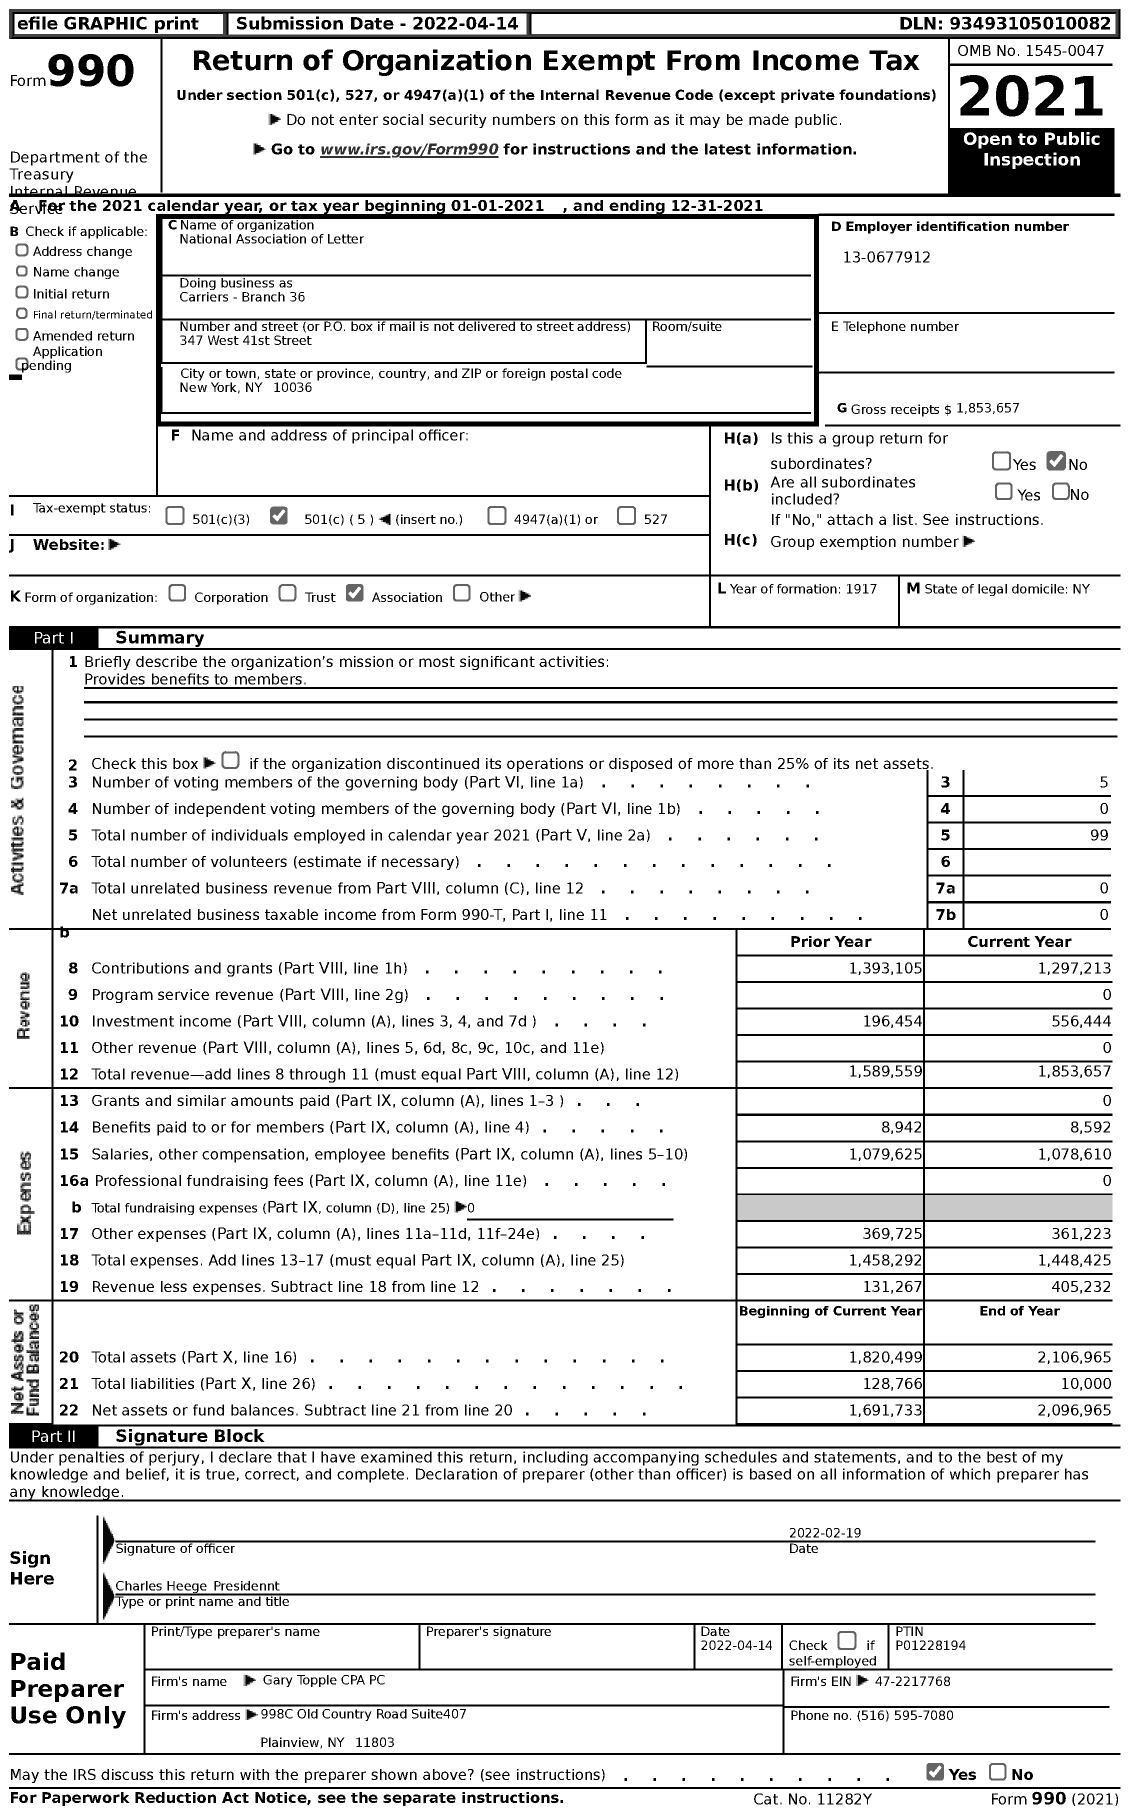 Image of first page of 2021 Form 990 for National Association of Letter Carriers - Carriers - Branch 36